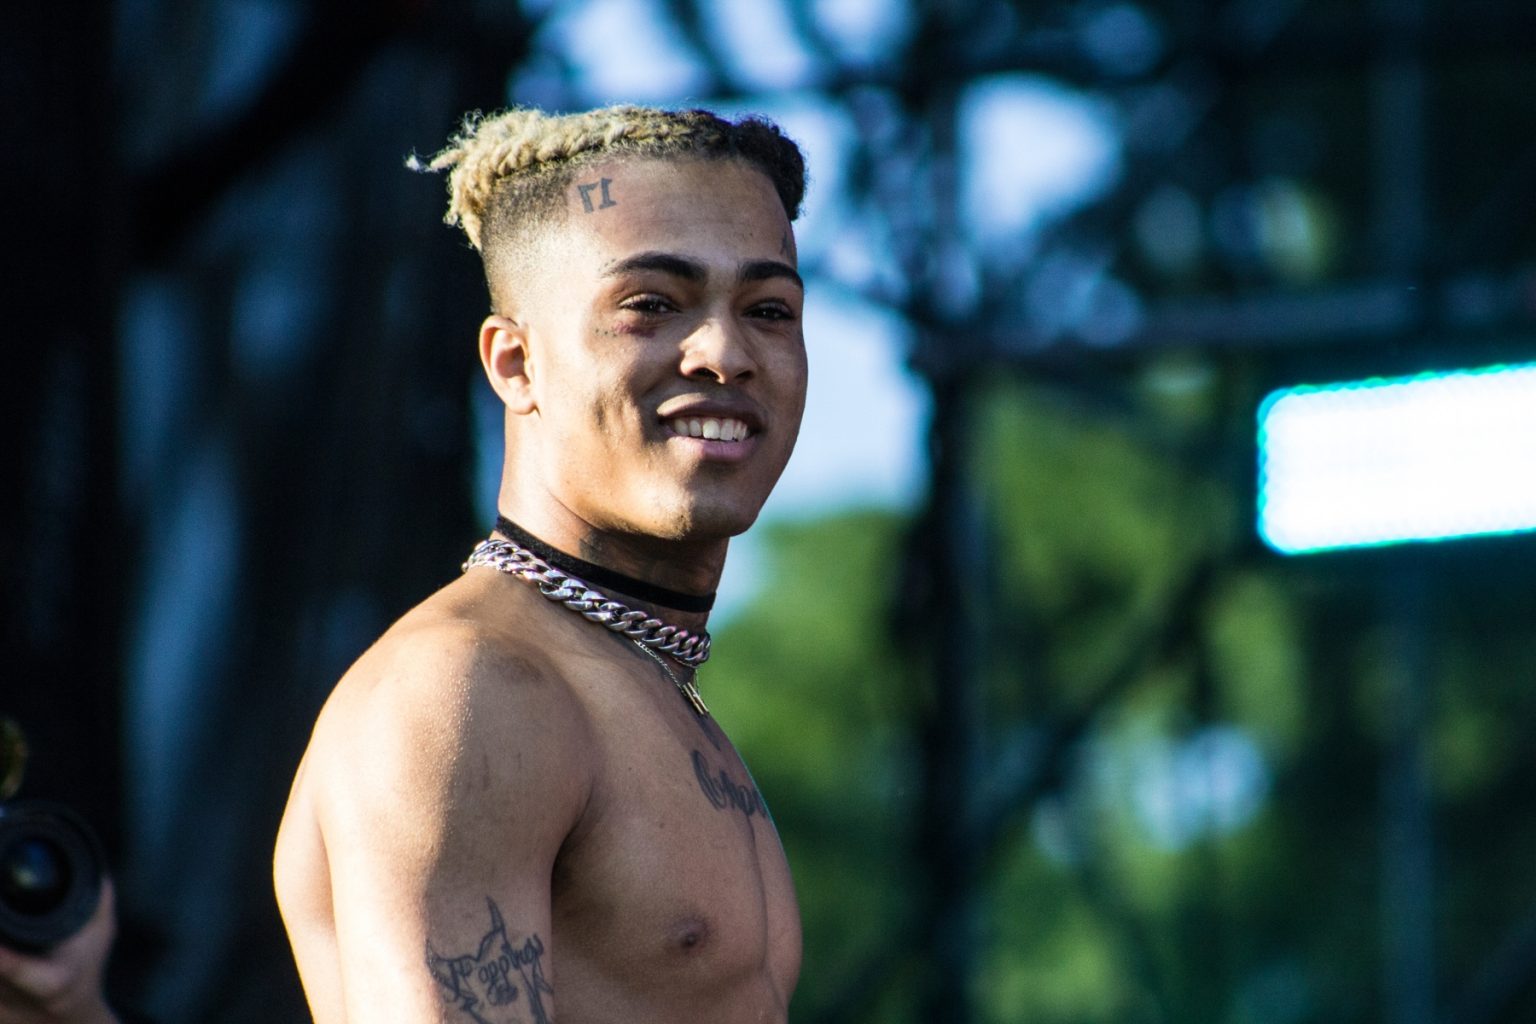 Xxxtentacions Classic Song Vice City Releases Officially On Streaming Services Listen 7927